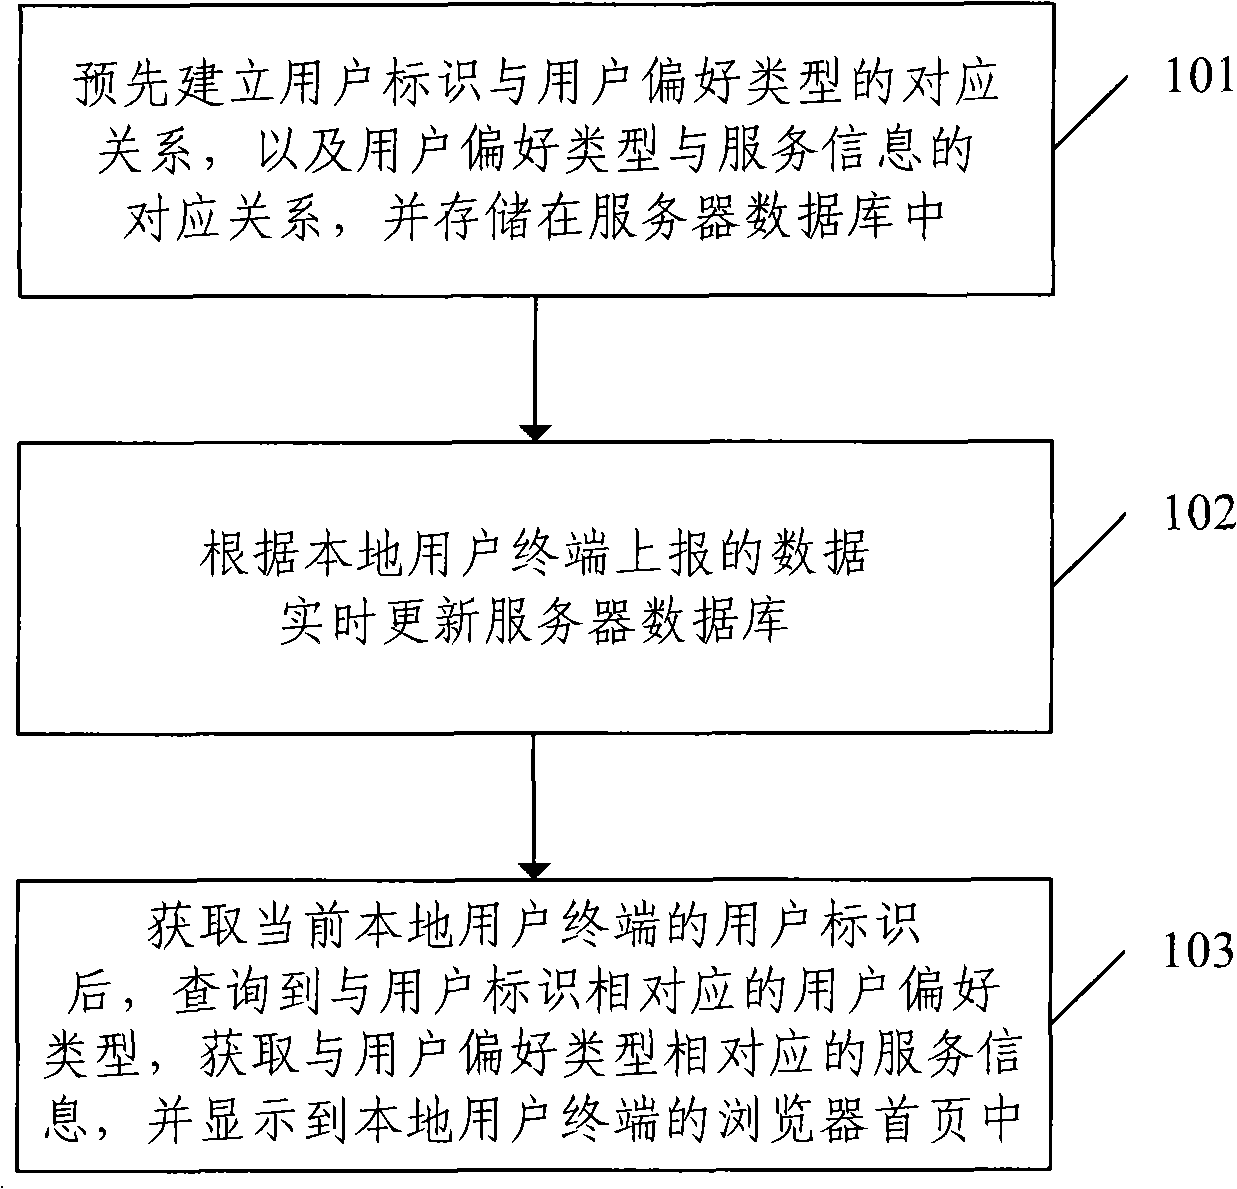 Method and system for pushing-sending service information